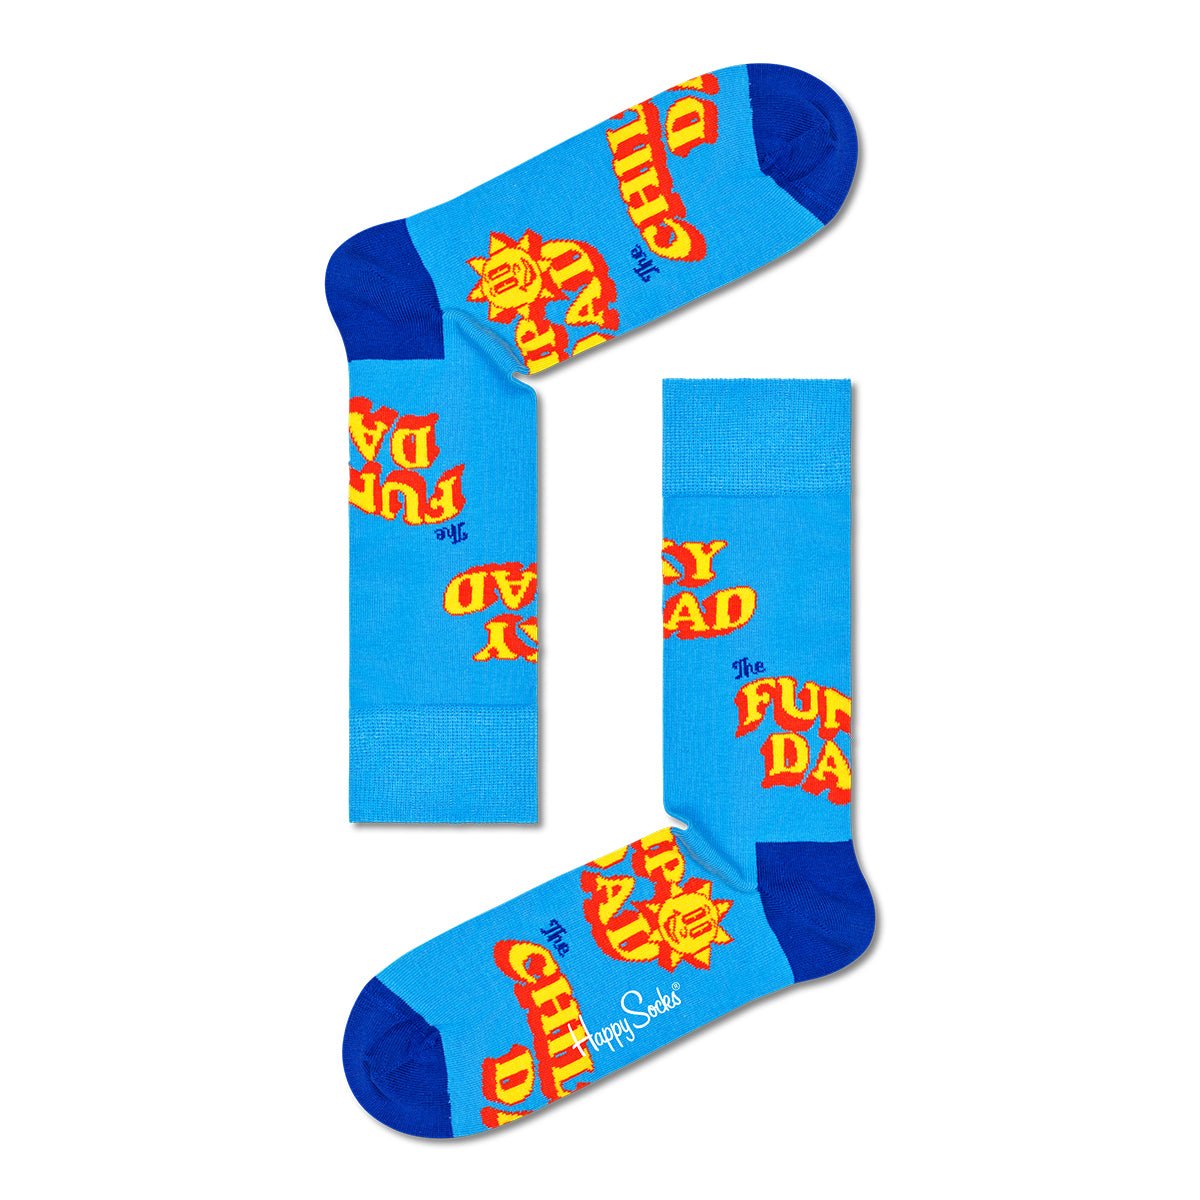 Gift Set Father Of The Year (6300) Socks 3-Pack